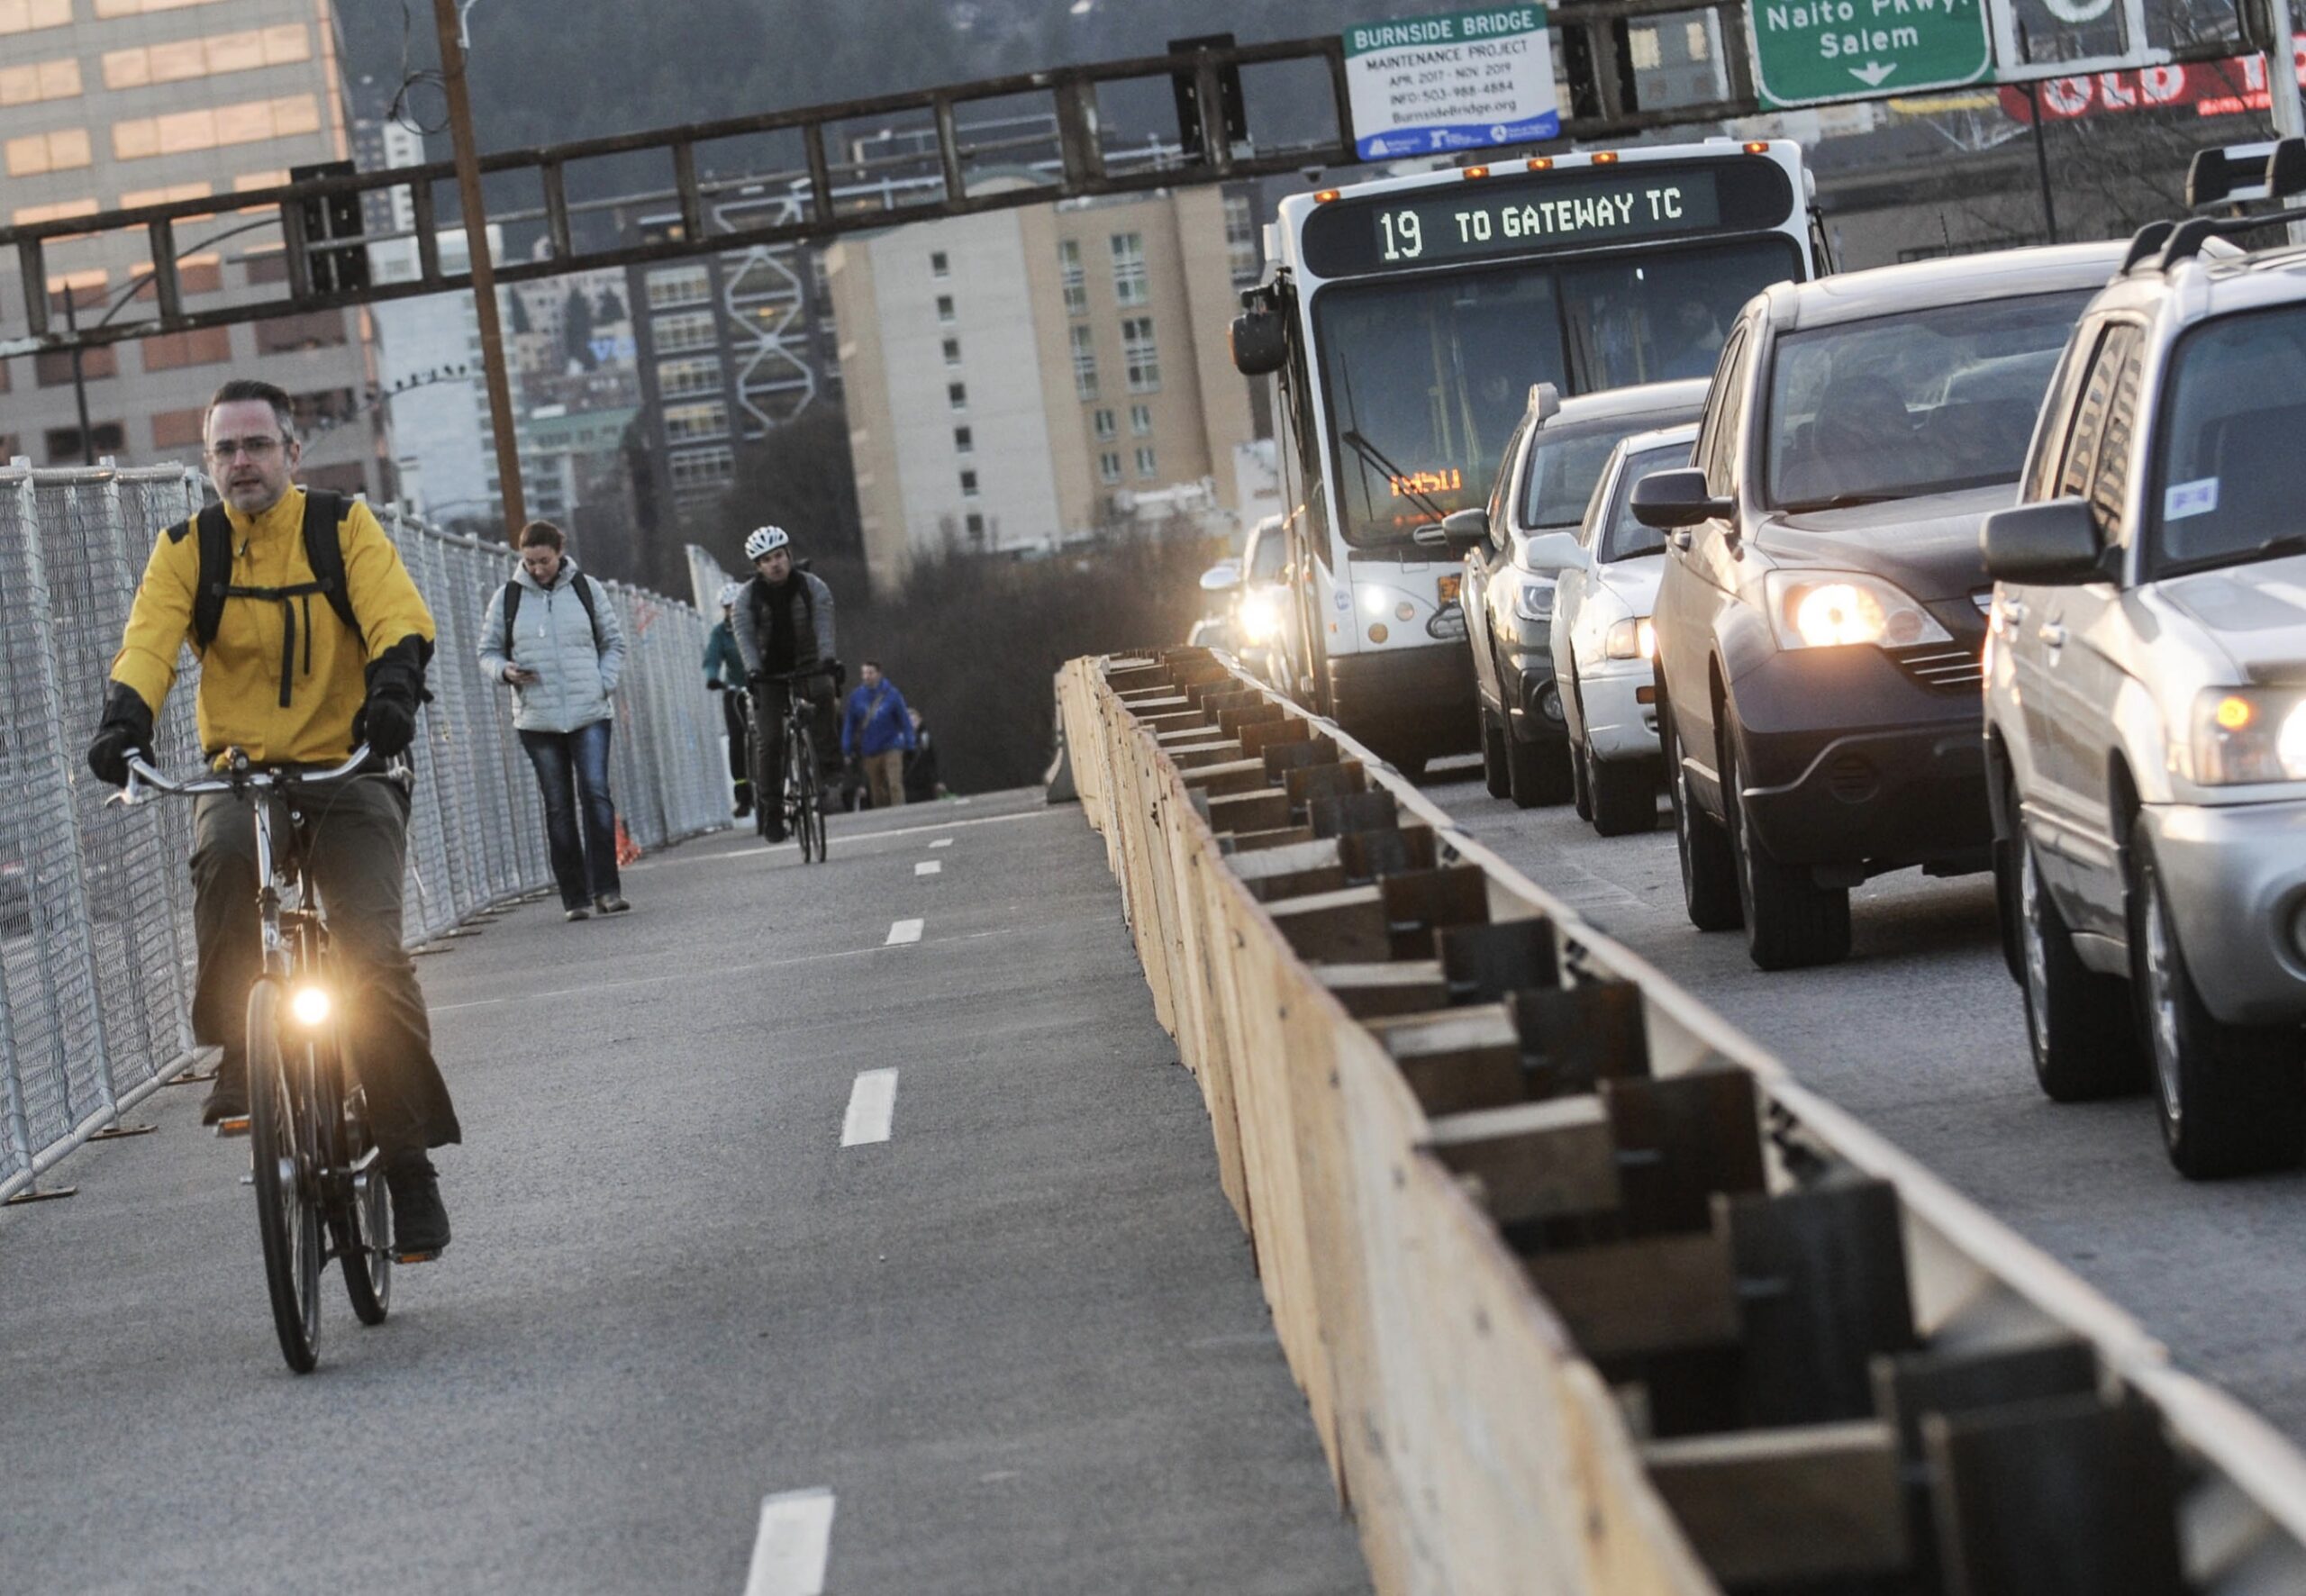 Riders in a bike path separated from other traffic lanes full of cars by a guardrail.